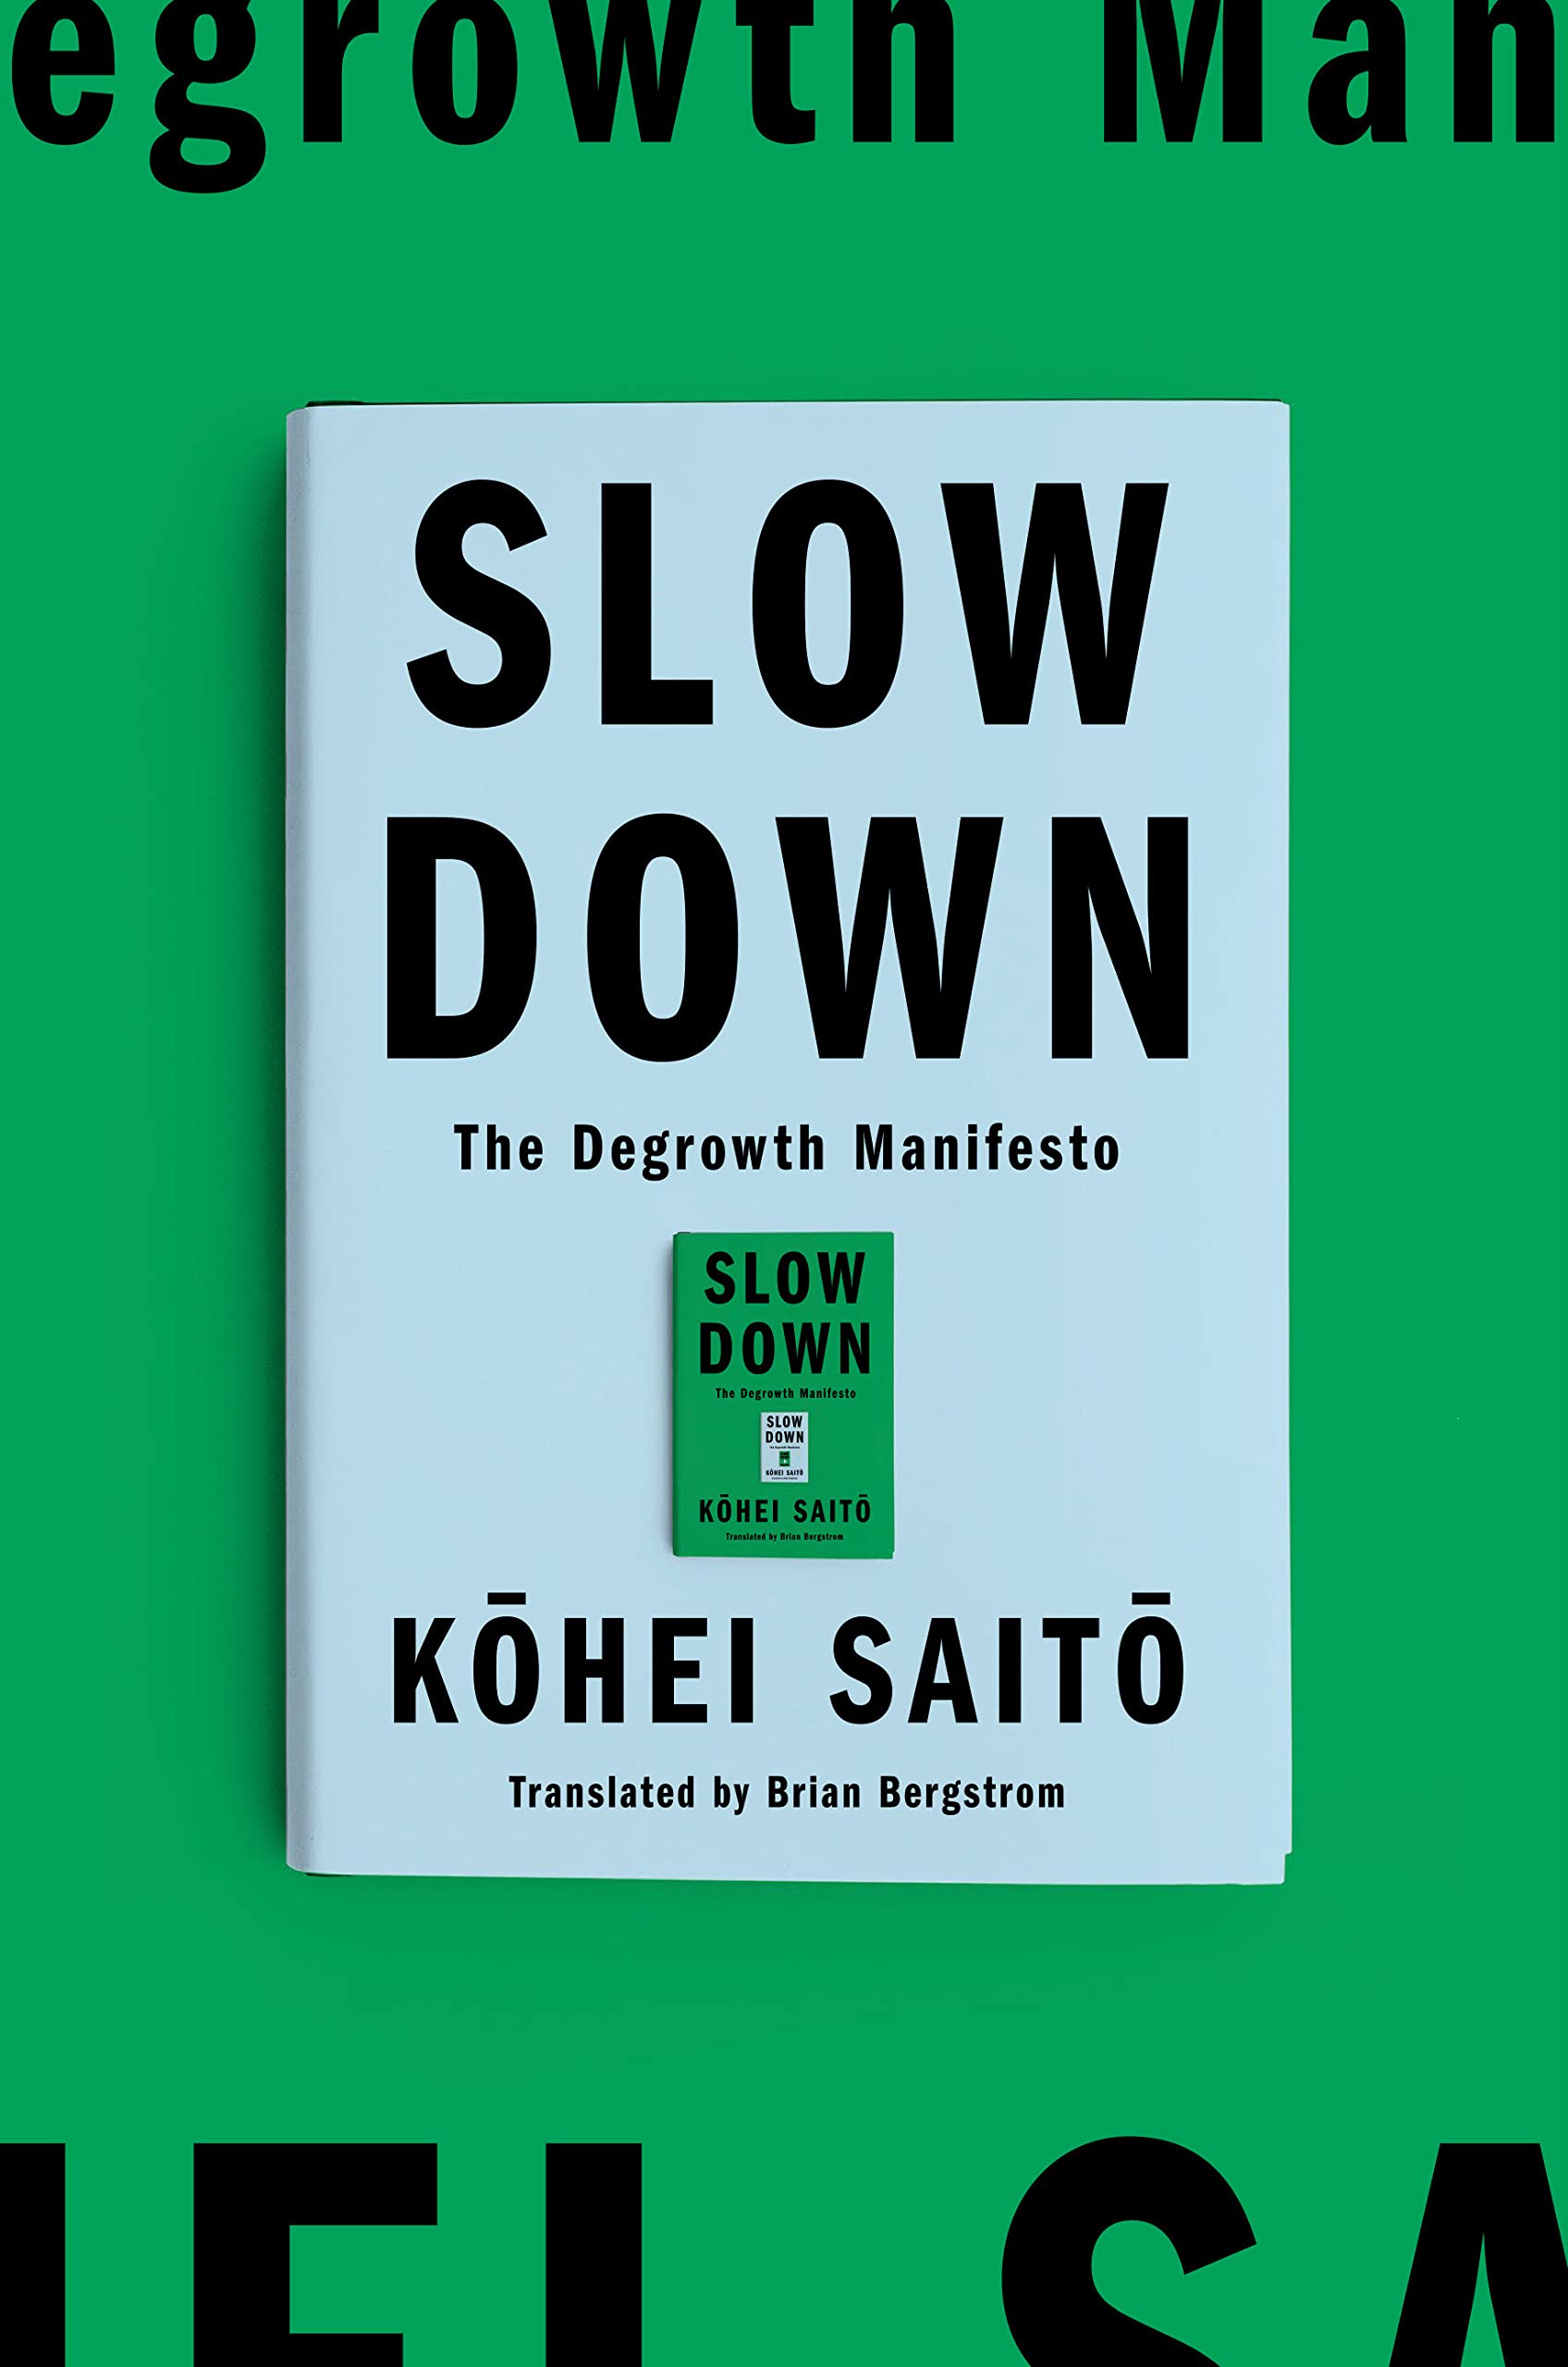 North American cover of Slow Down: The Degrowth Manifesto